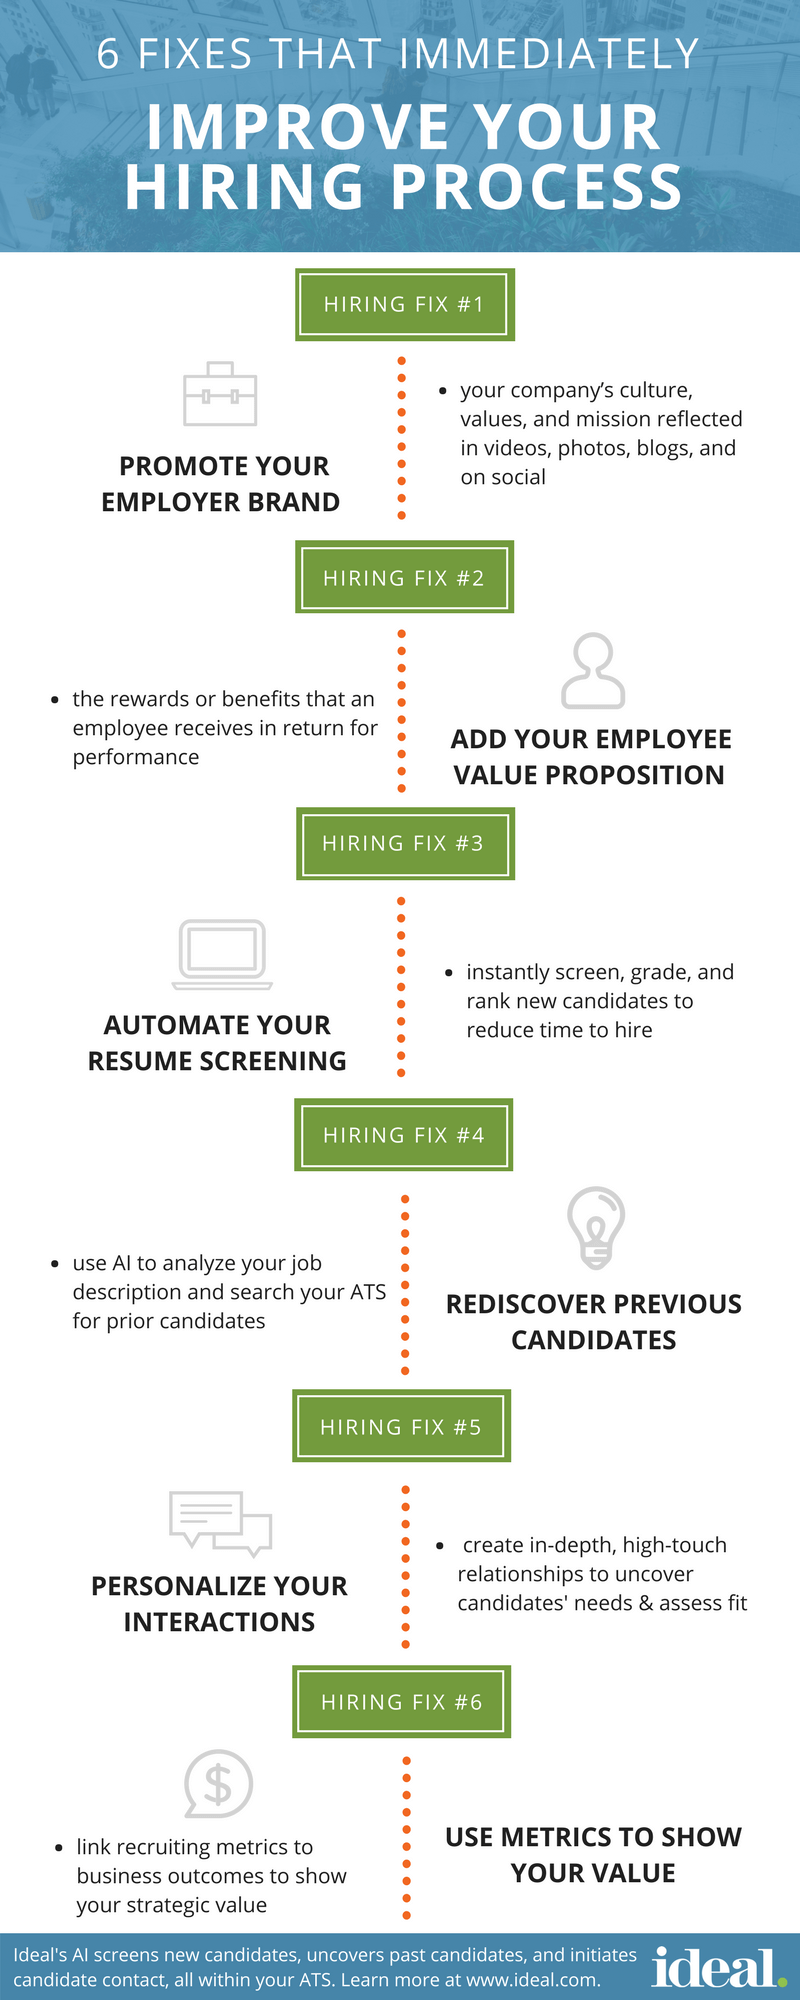 6 Fixes That Immediately Improve Your Hiring Process [Infographic]